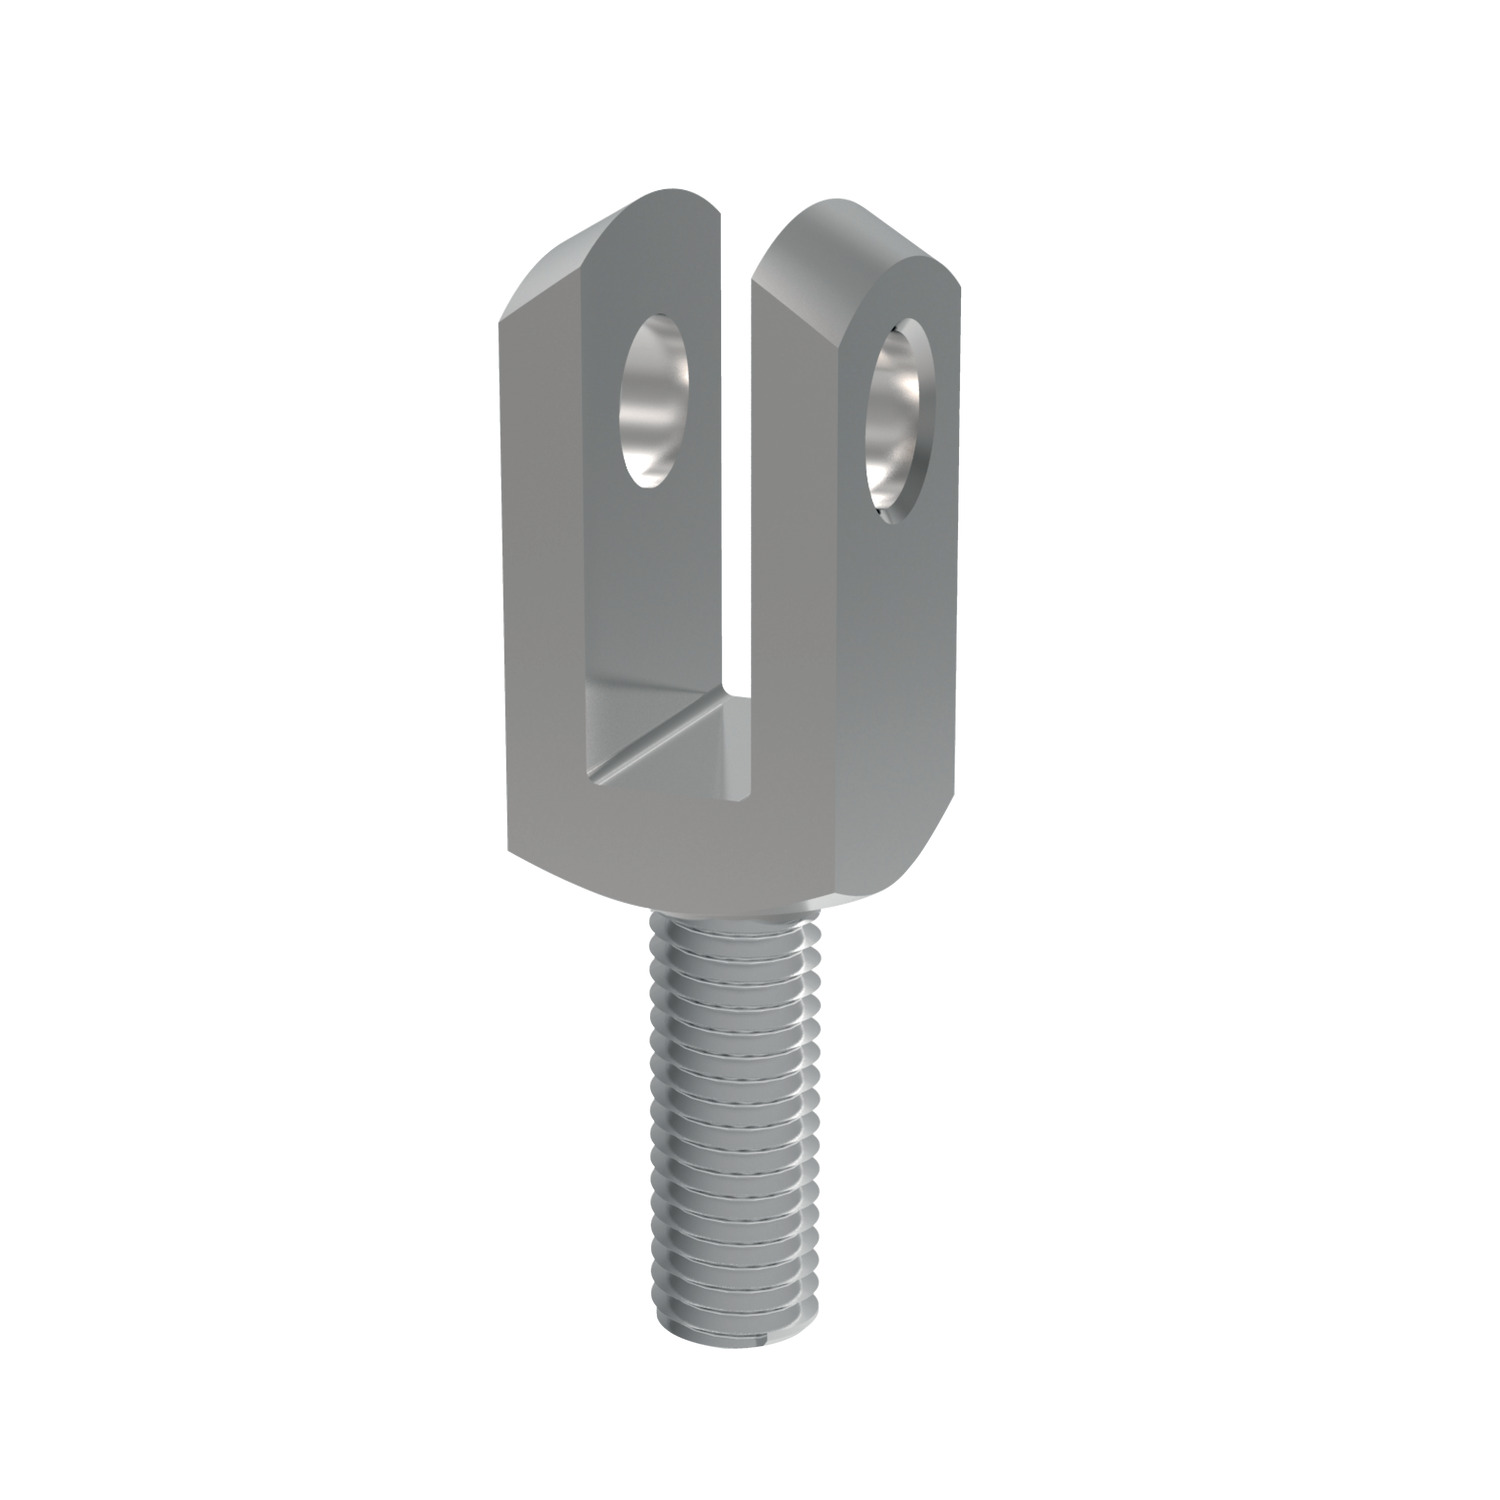 Male Clevis Joints Left hand thread Male clevis joints in zinc plated steel.